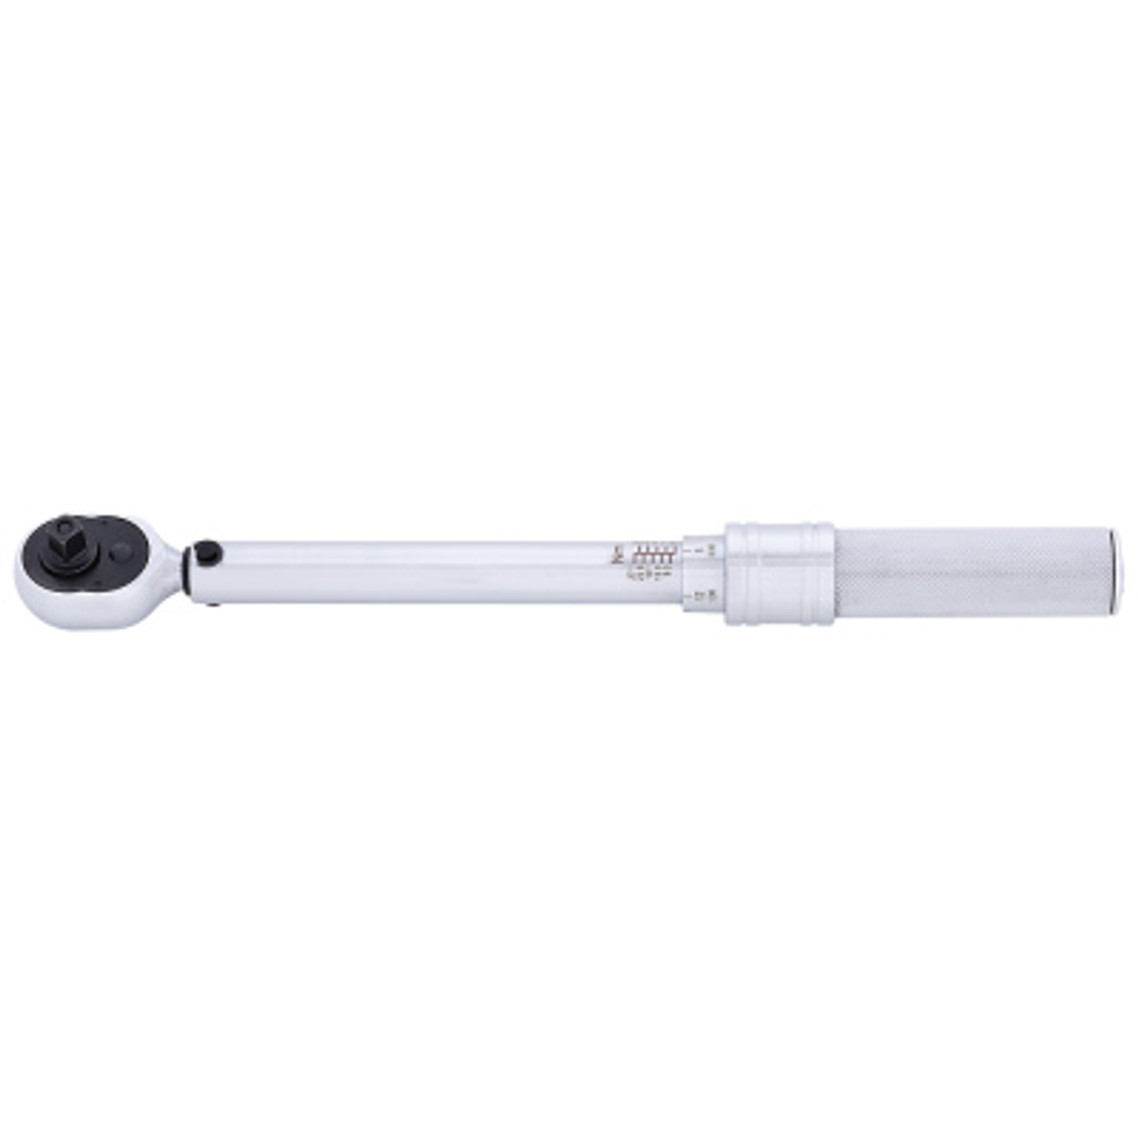 JITW-14250 Jet New - Industrial Series Torque Wrench - 1/4" DR 50-250 IN/LB | Safetywear.ca